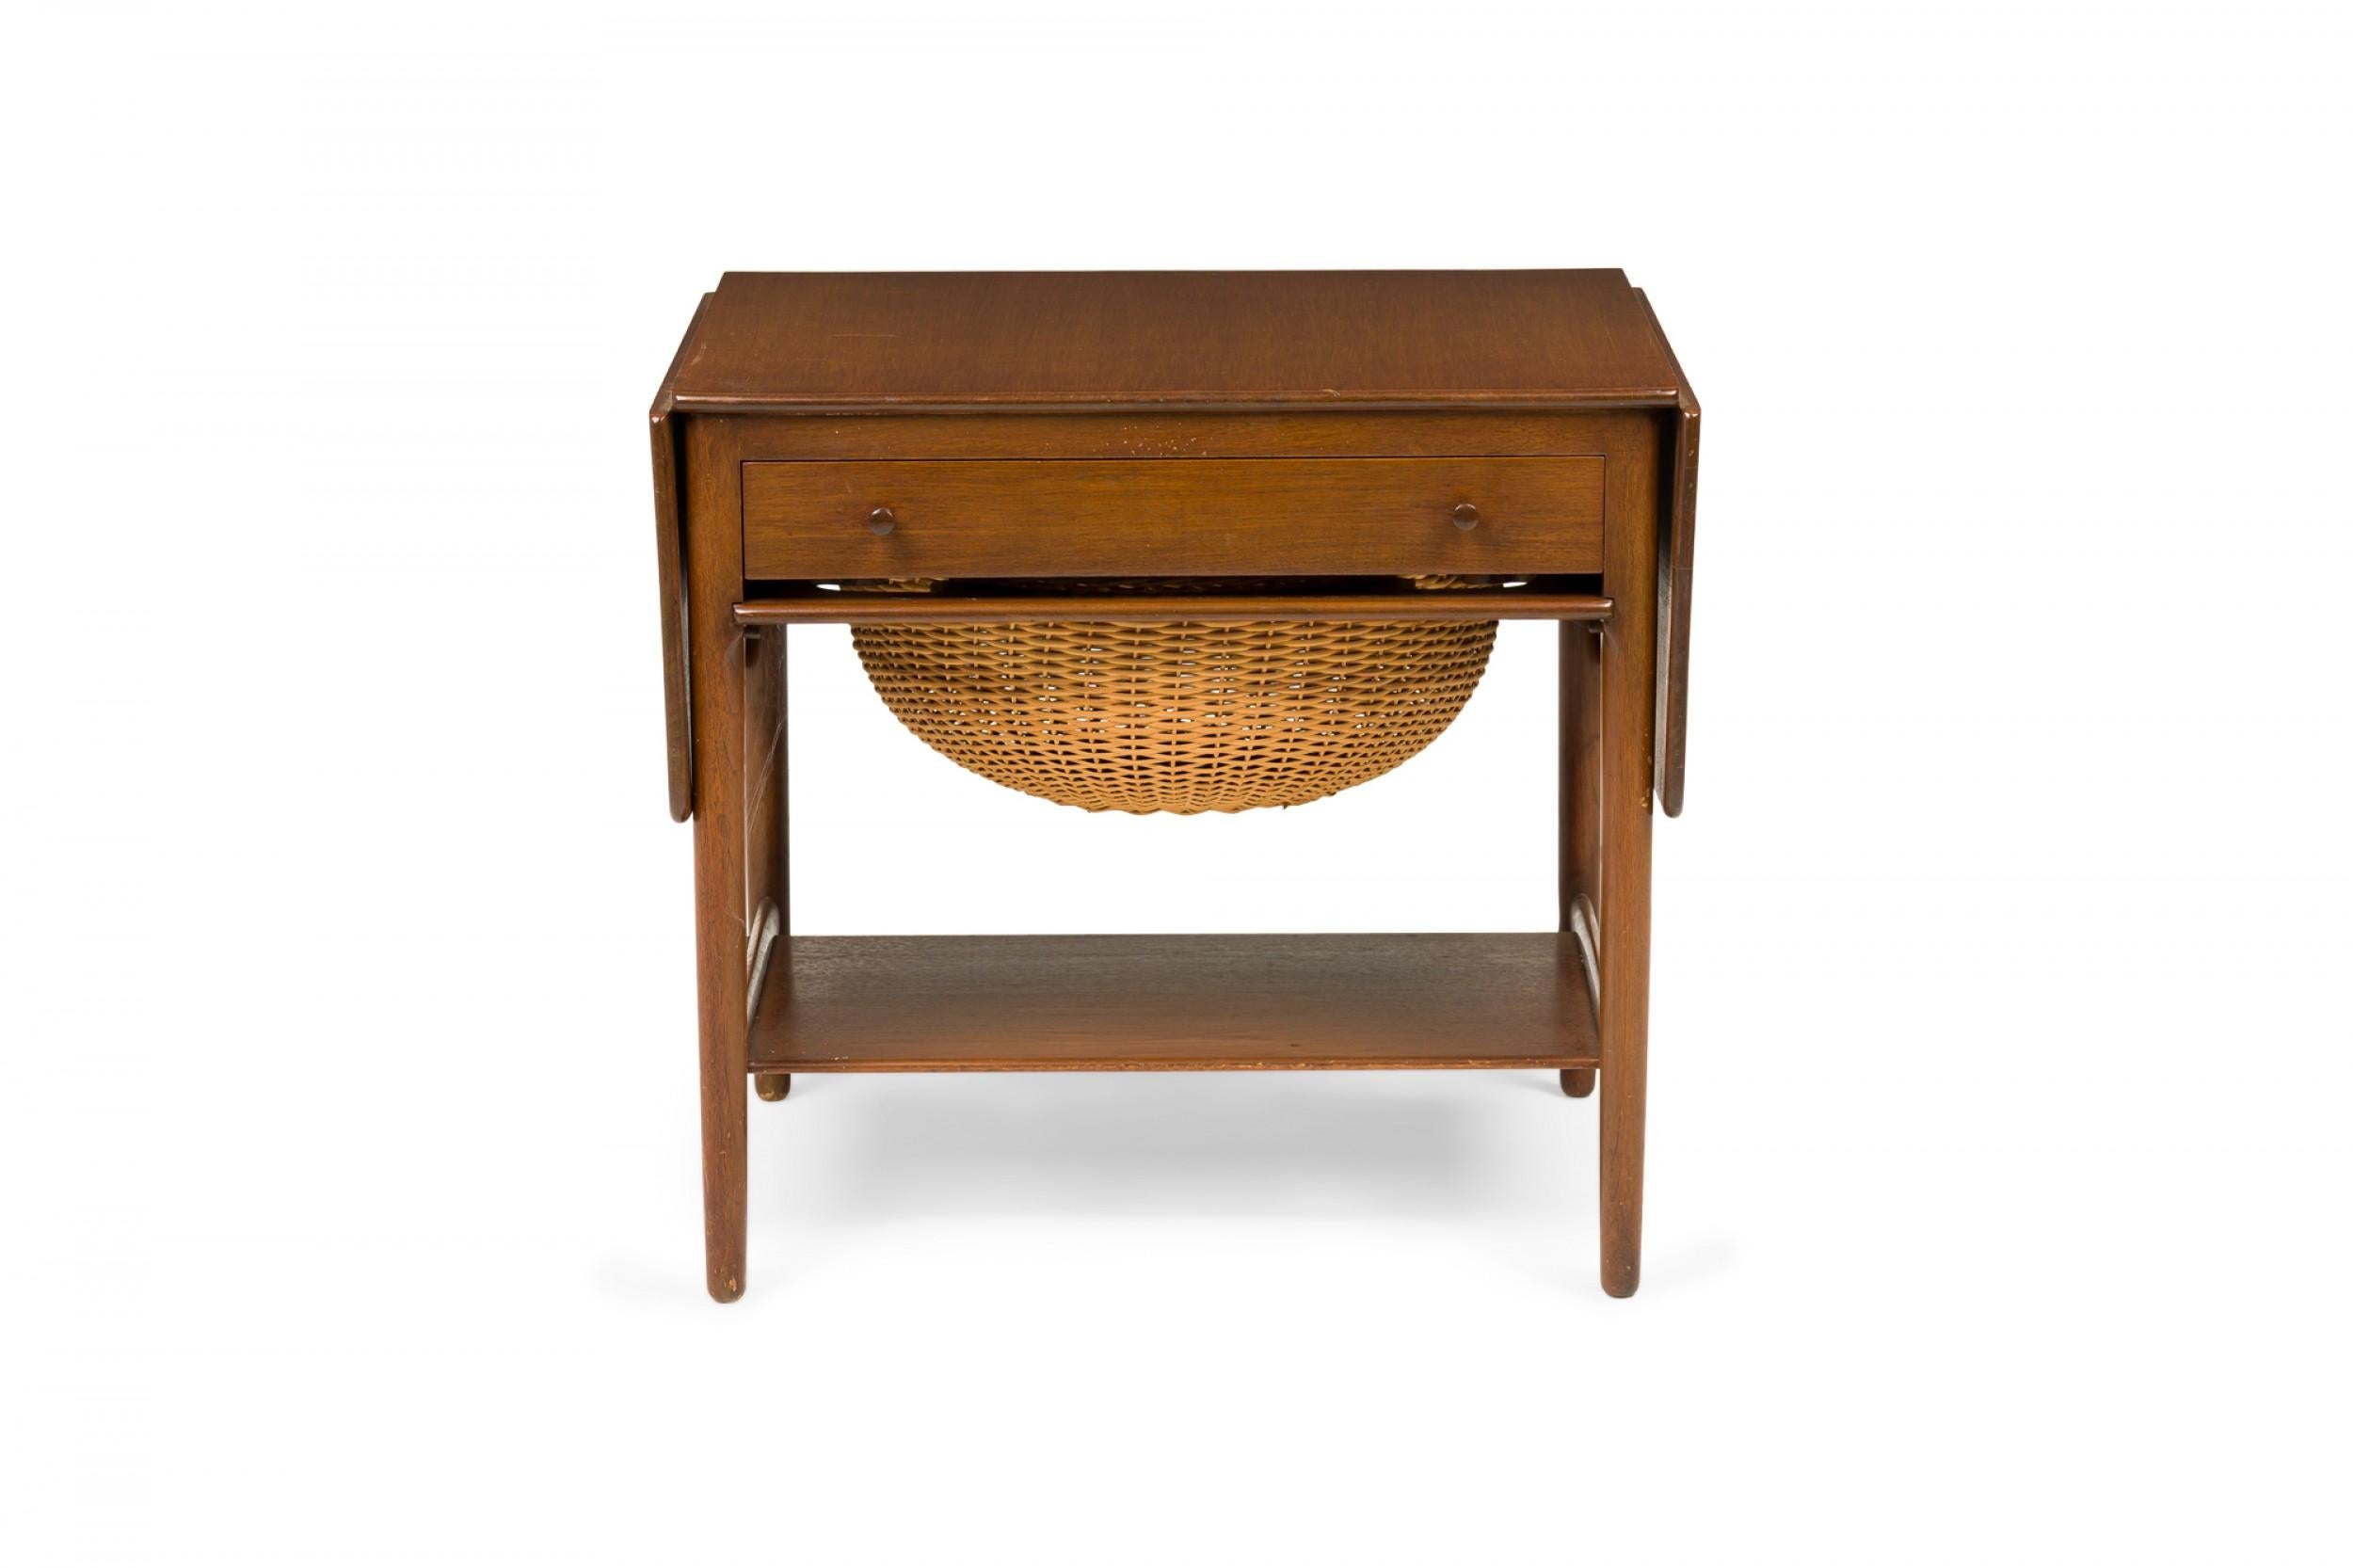 American mid-century teak wood sewing table with two drop leaves on either side, a single drawer with two wooden knob drawer pulls, and a sliding compartment containing a removable woven wicker basket over a smaller stretcher shelf connecting four